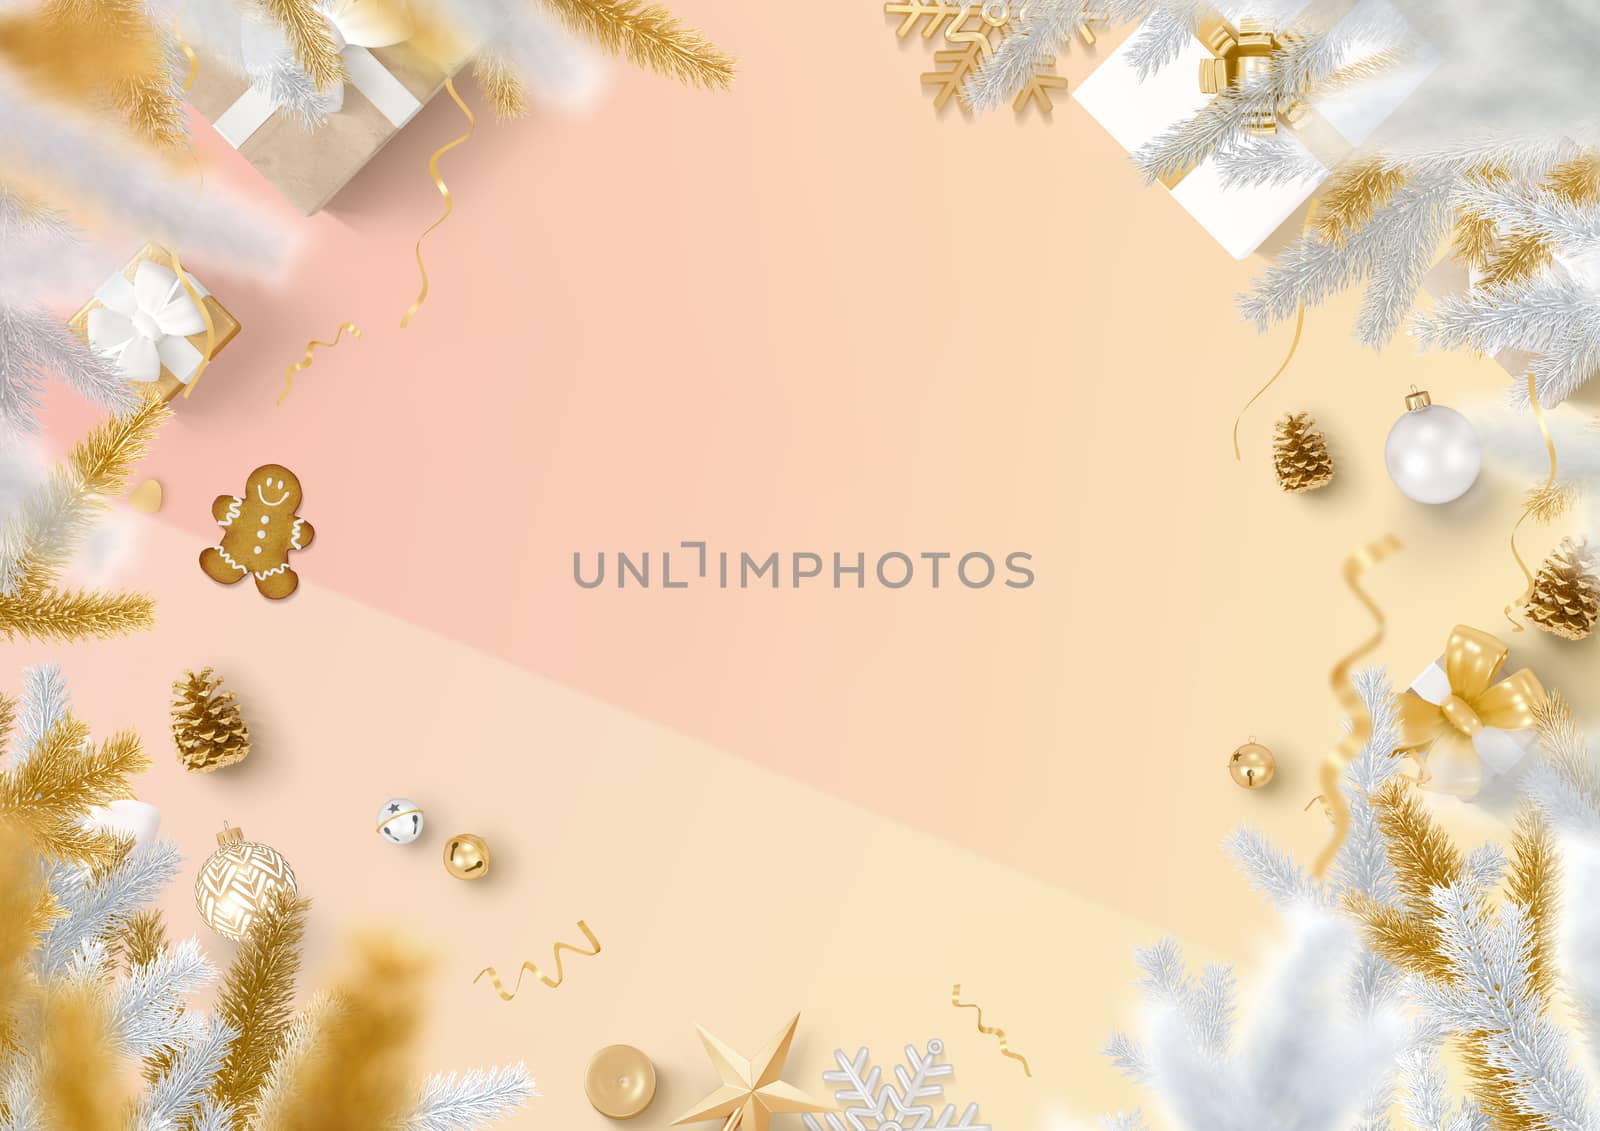 The Christmas decoration border and gradient trendy paper background